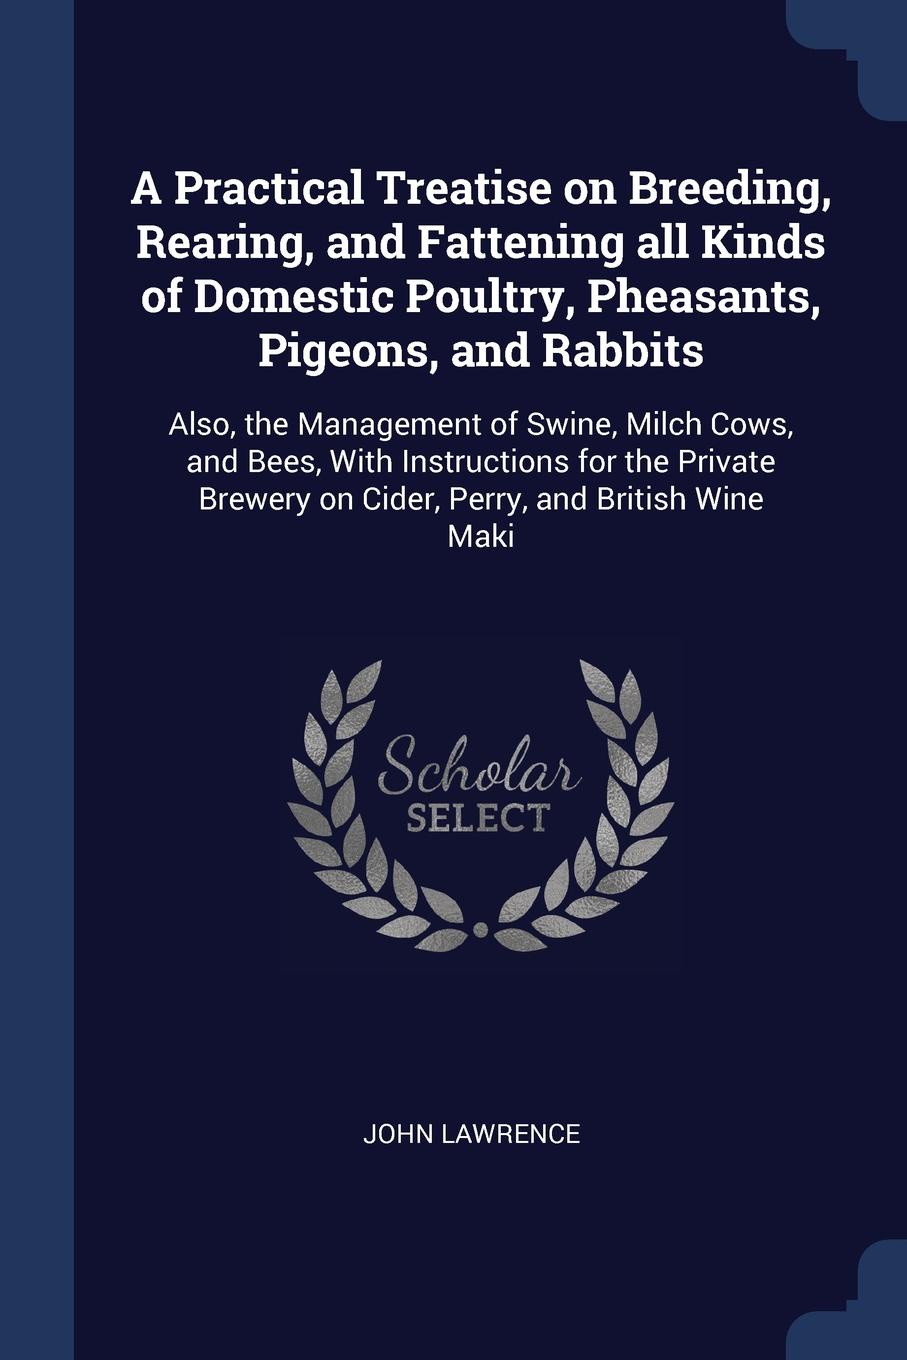 A Practical Treatise on Breeding, Rearing, and Fattening all Kinds of Domestic Poultry, Pheasants, Pigeons, and Rabbits. Also, the Management of Swine, Milch Cows, and Bees, With Instructions for the Private Brewery on Cider, Perry, and British Wi...